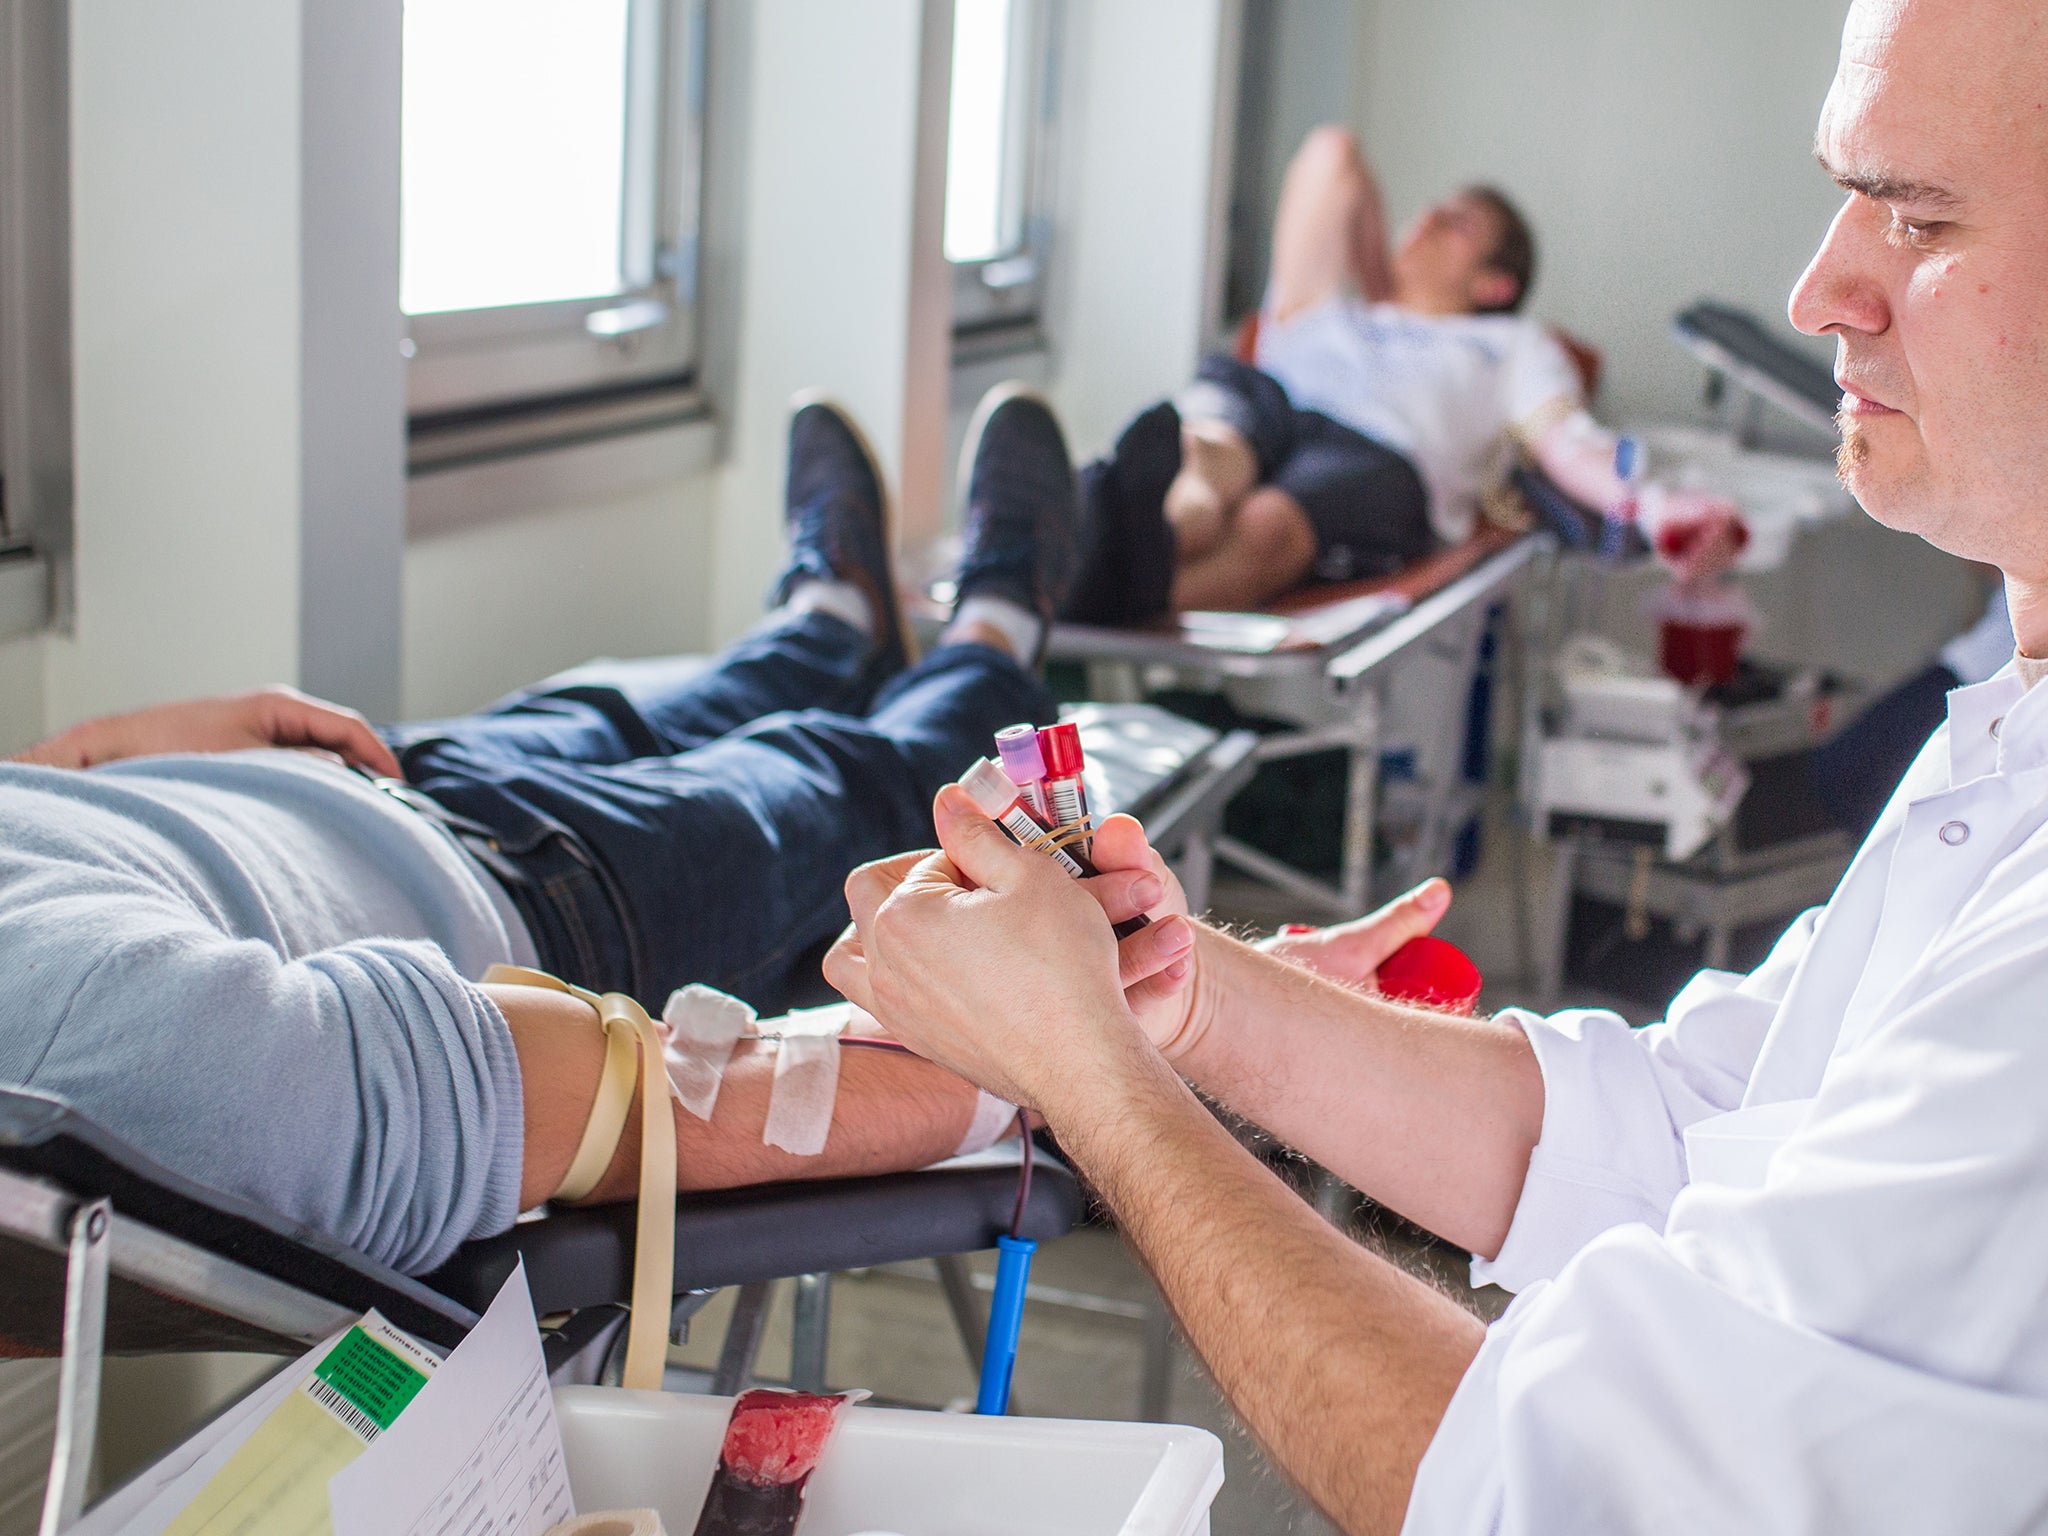 where can gay men donate blood